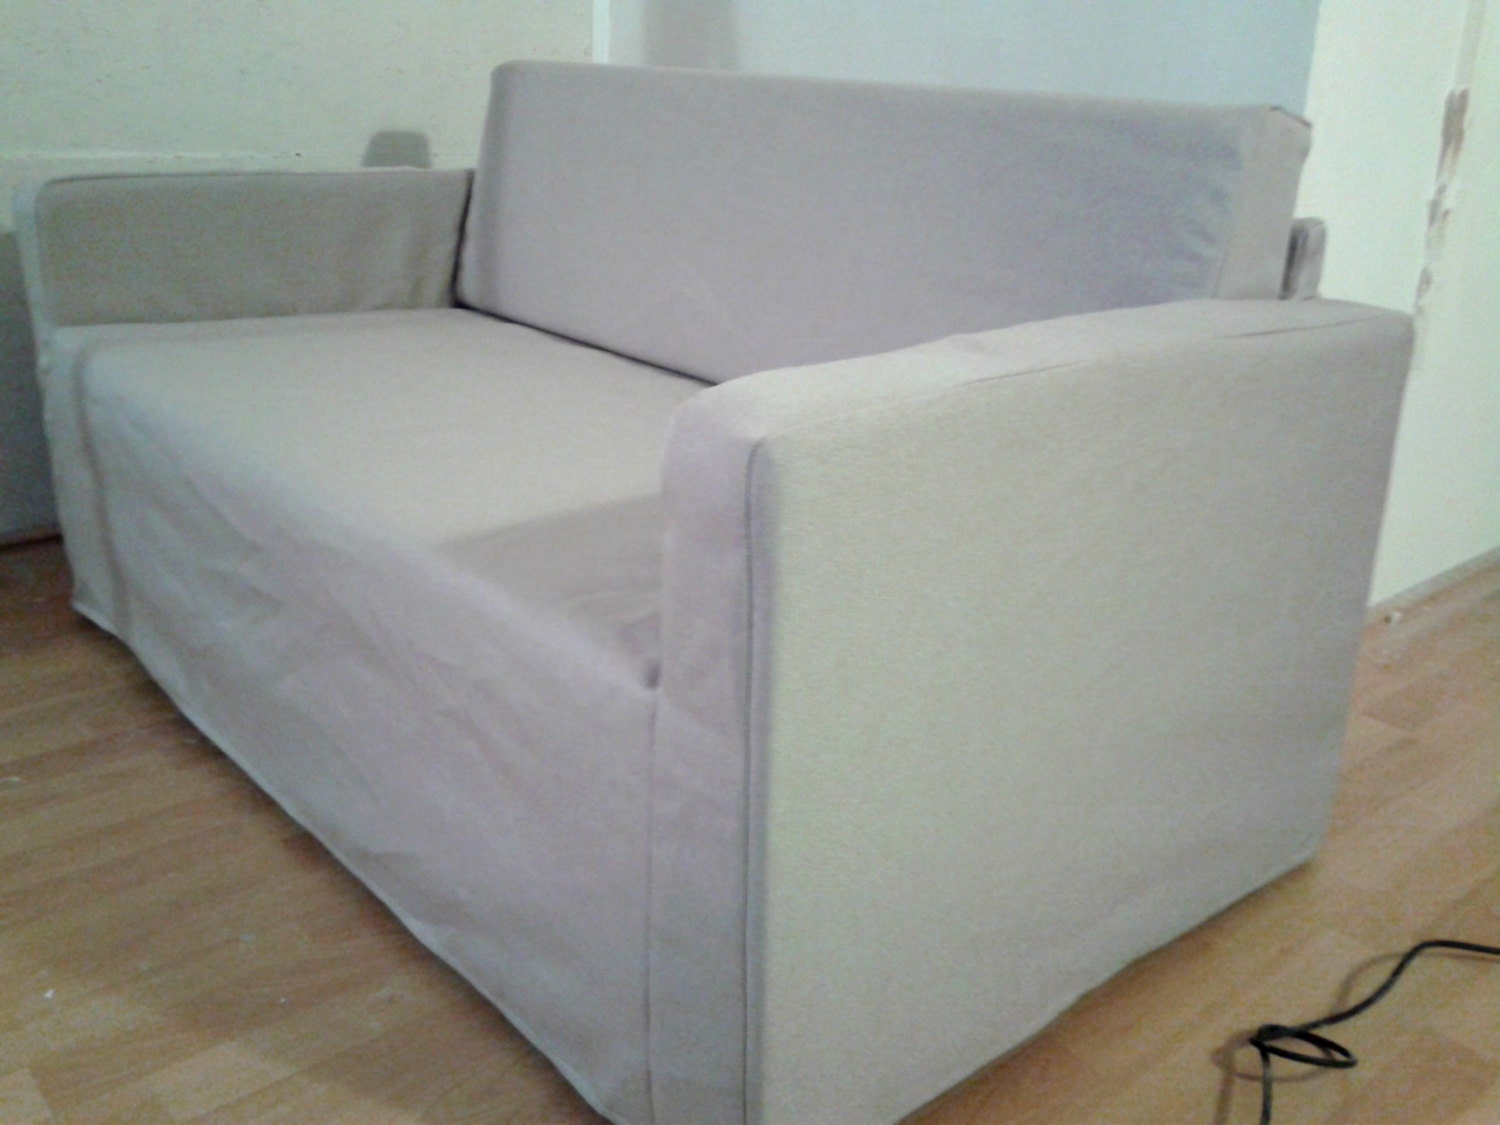 Slipcover for Solsta sofa-bed from IKEA strong by KustomCovers